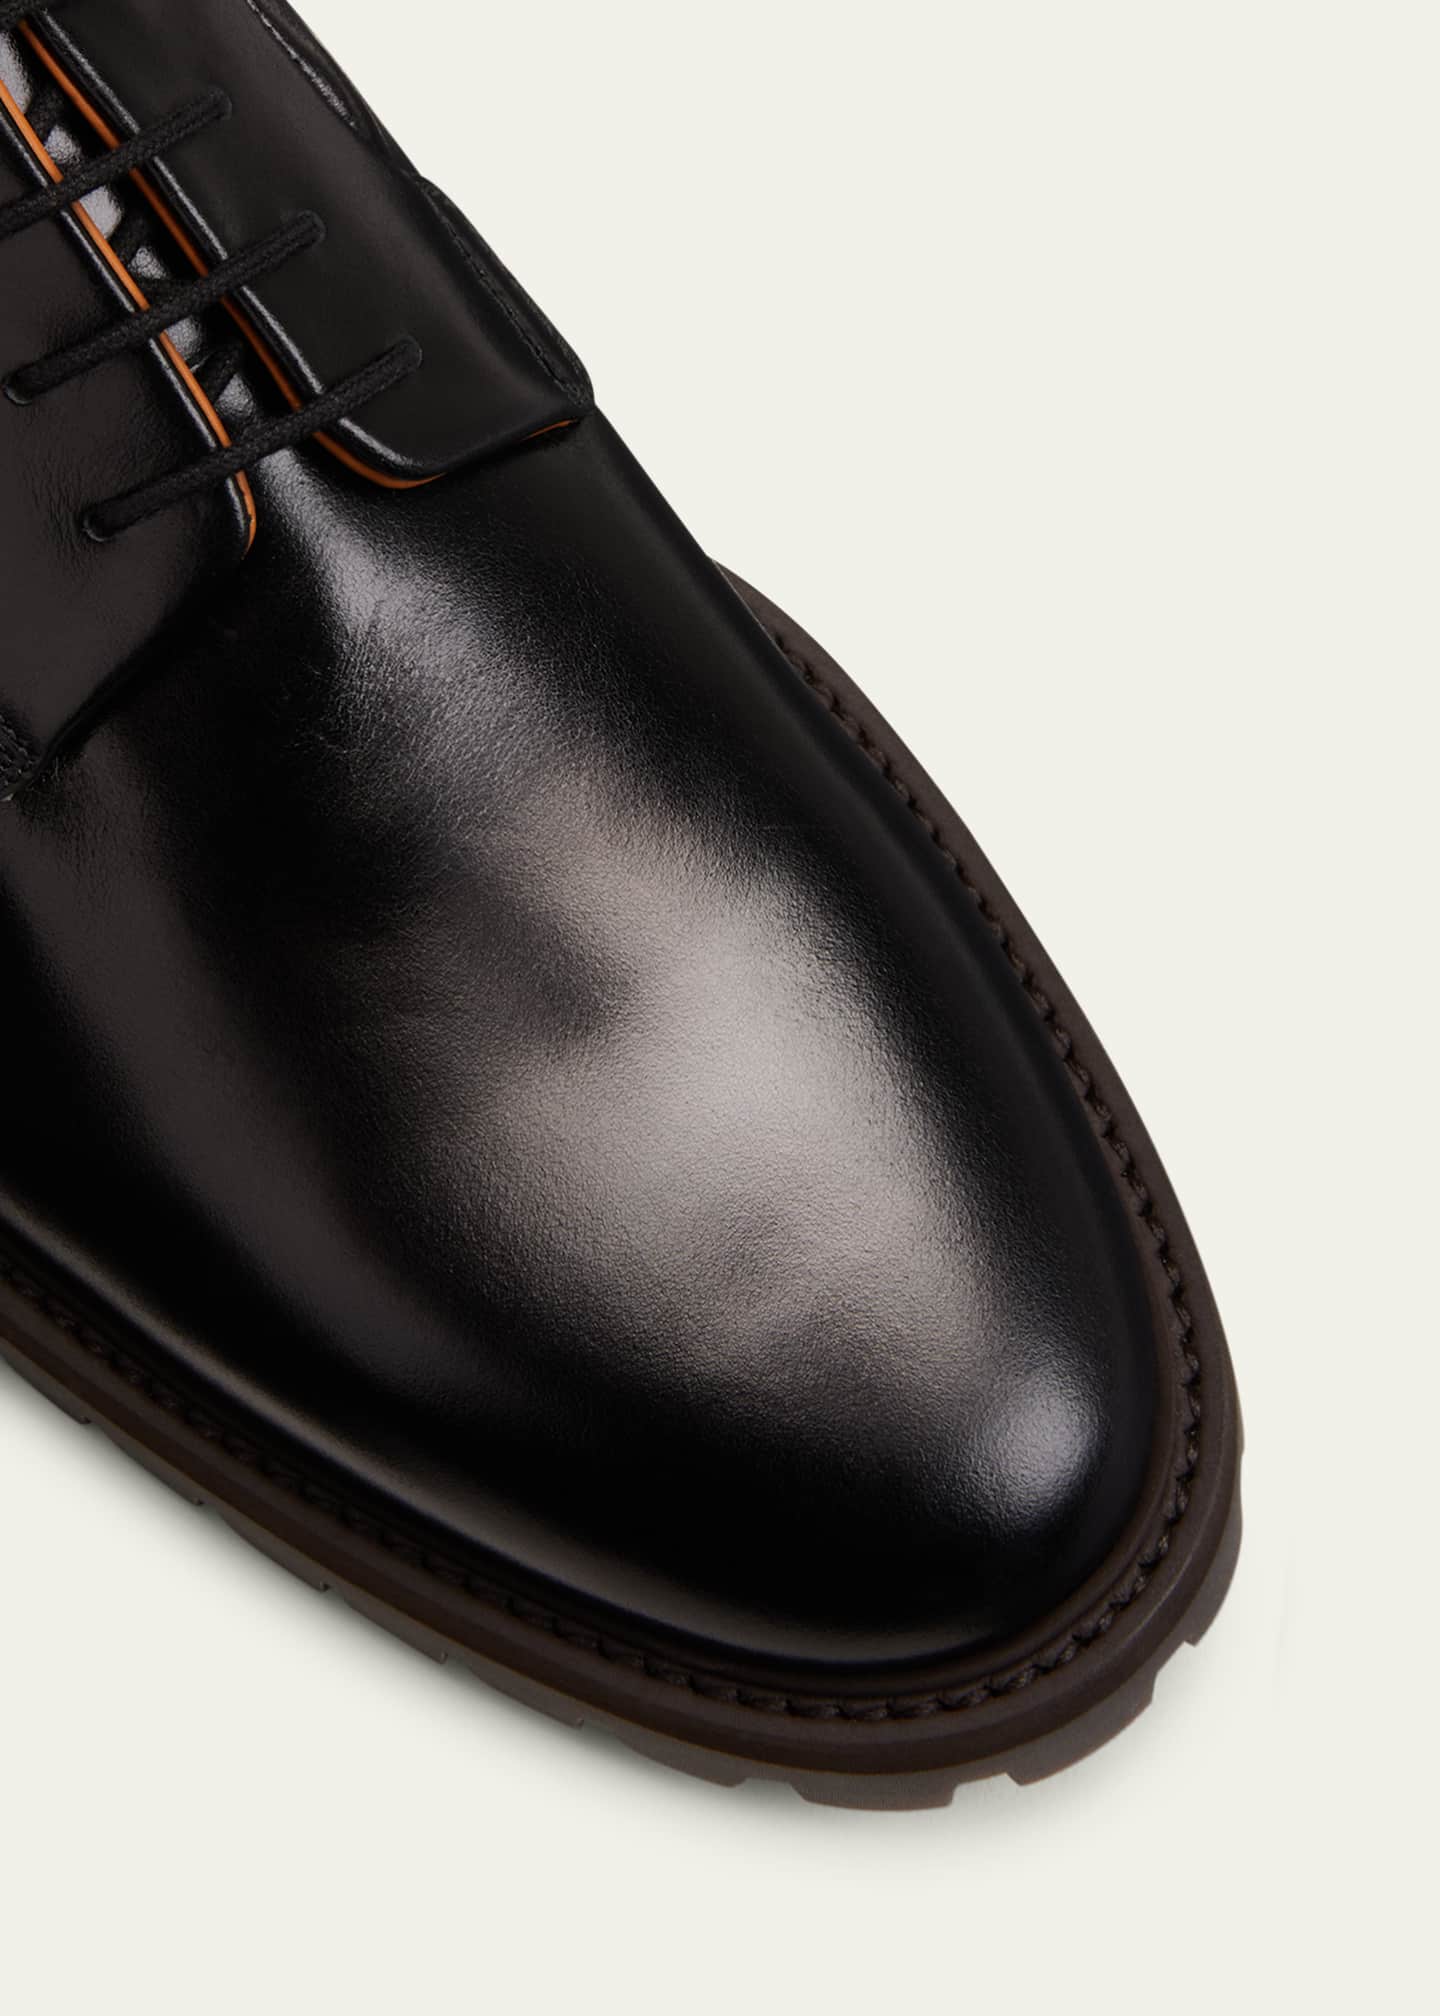 Common Projects Men's Lug Sole Leather Derby Shoes - Bergdorf Goodman